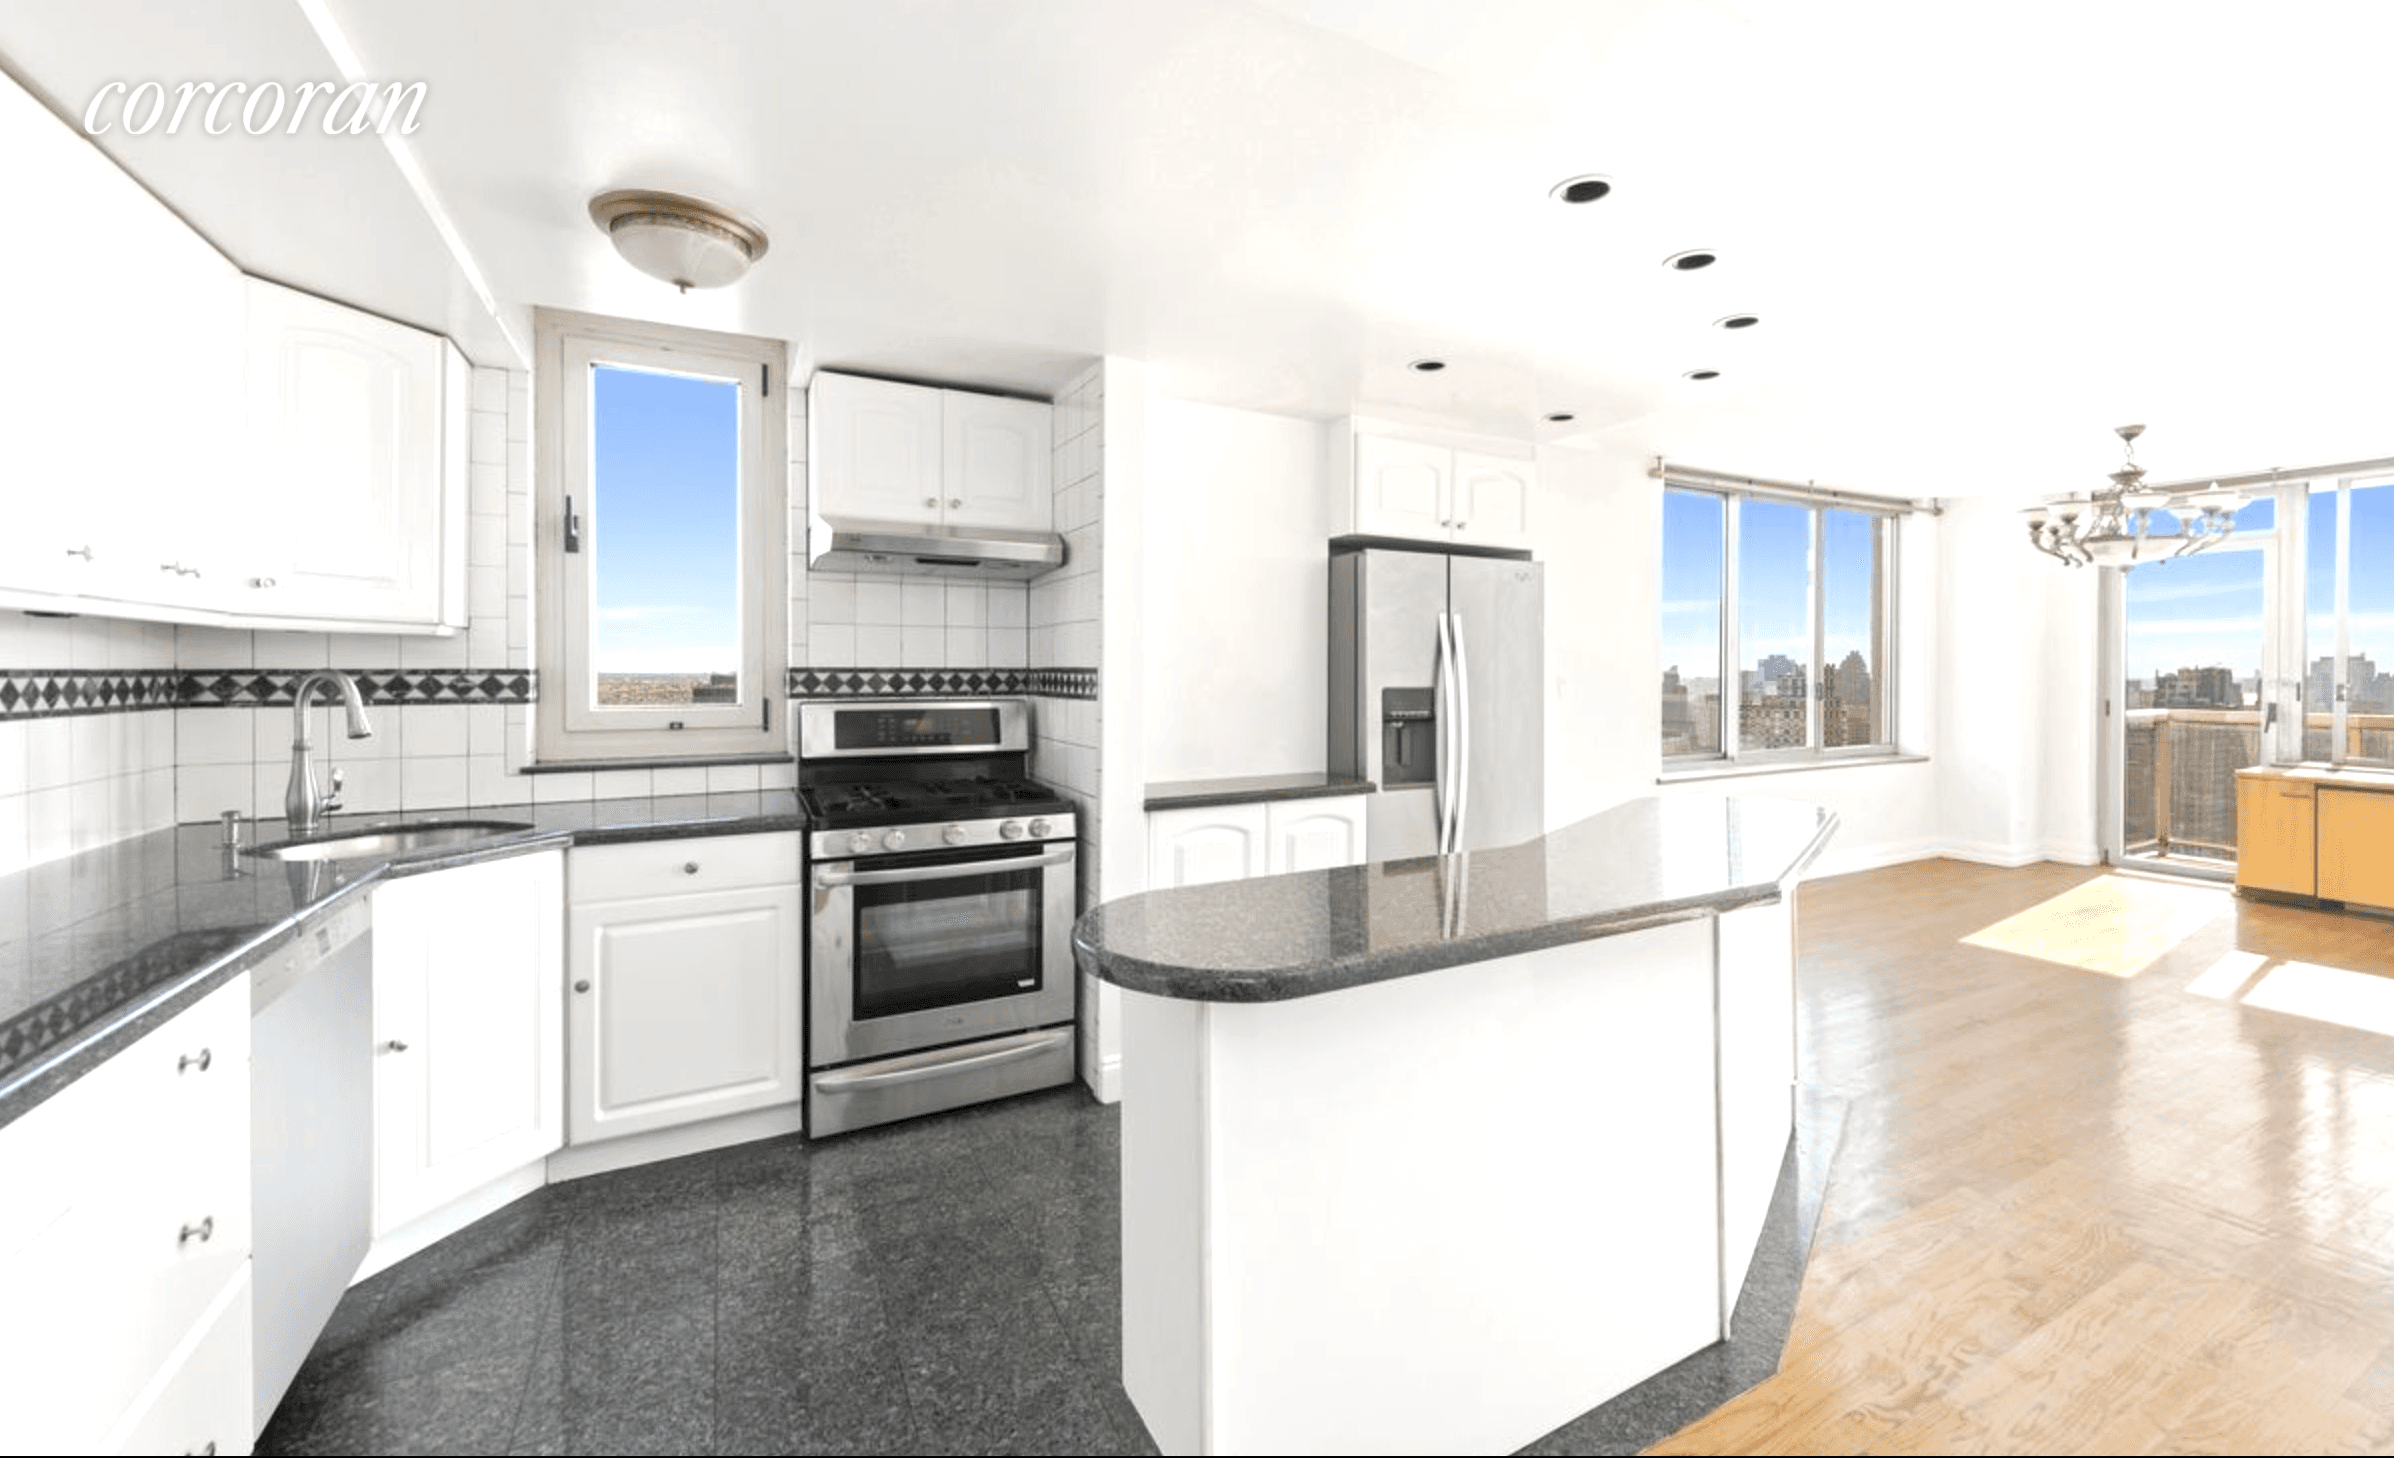 Welcome INVESTORS to 200 East 89th Street, New York, NY 10028 Apt 41DE.